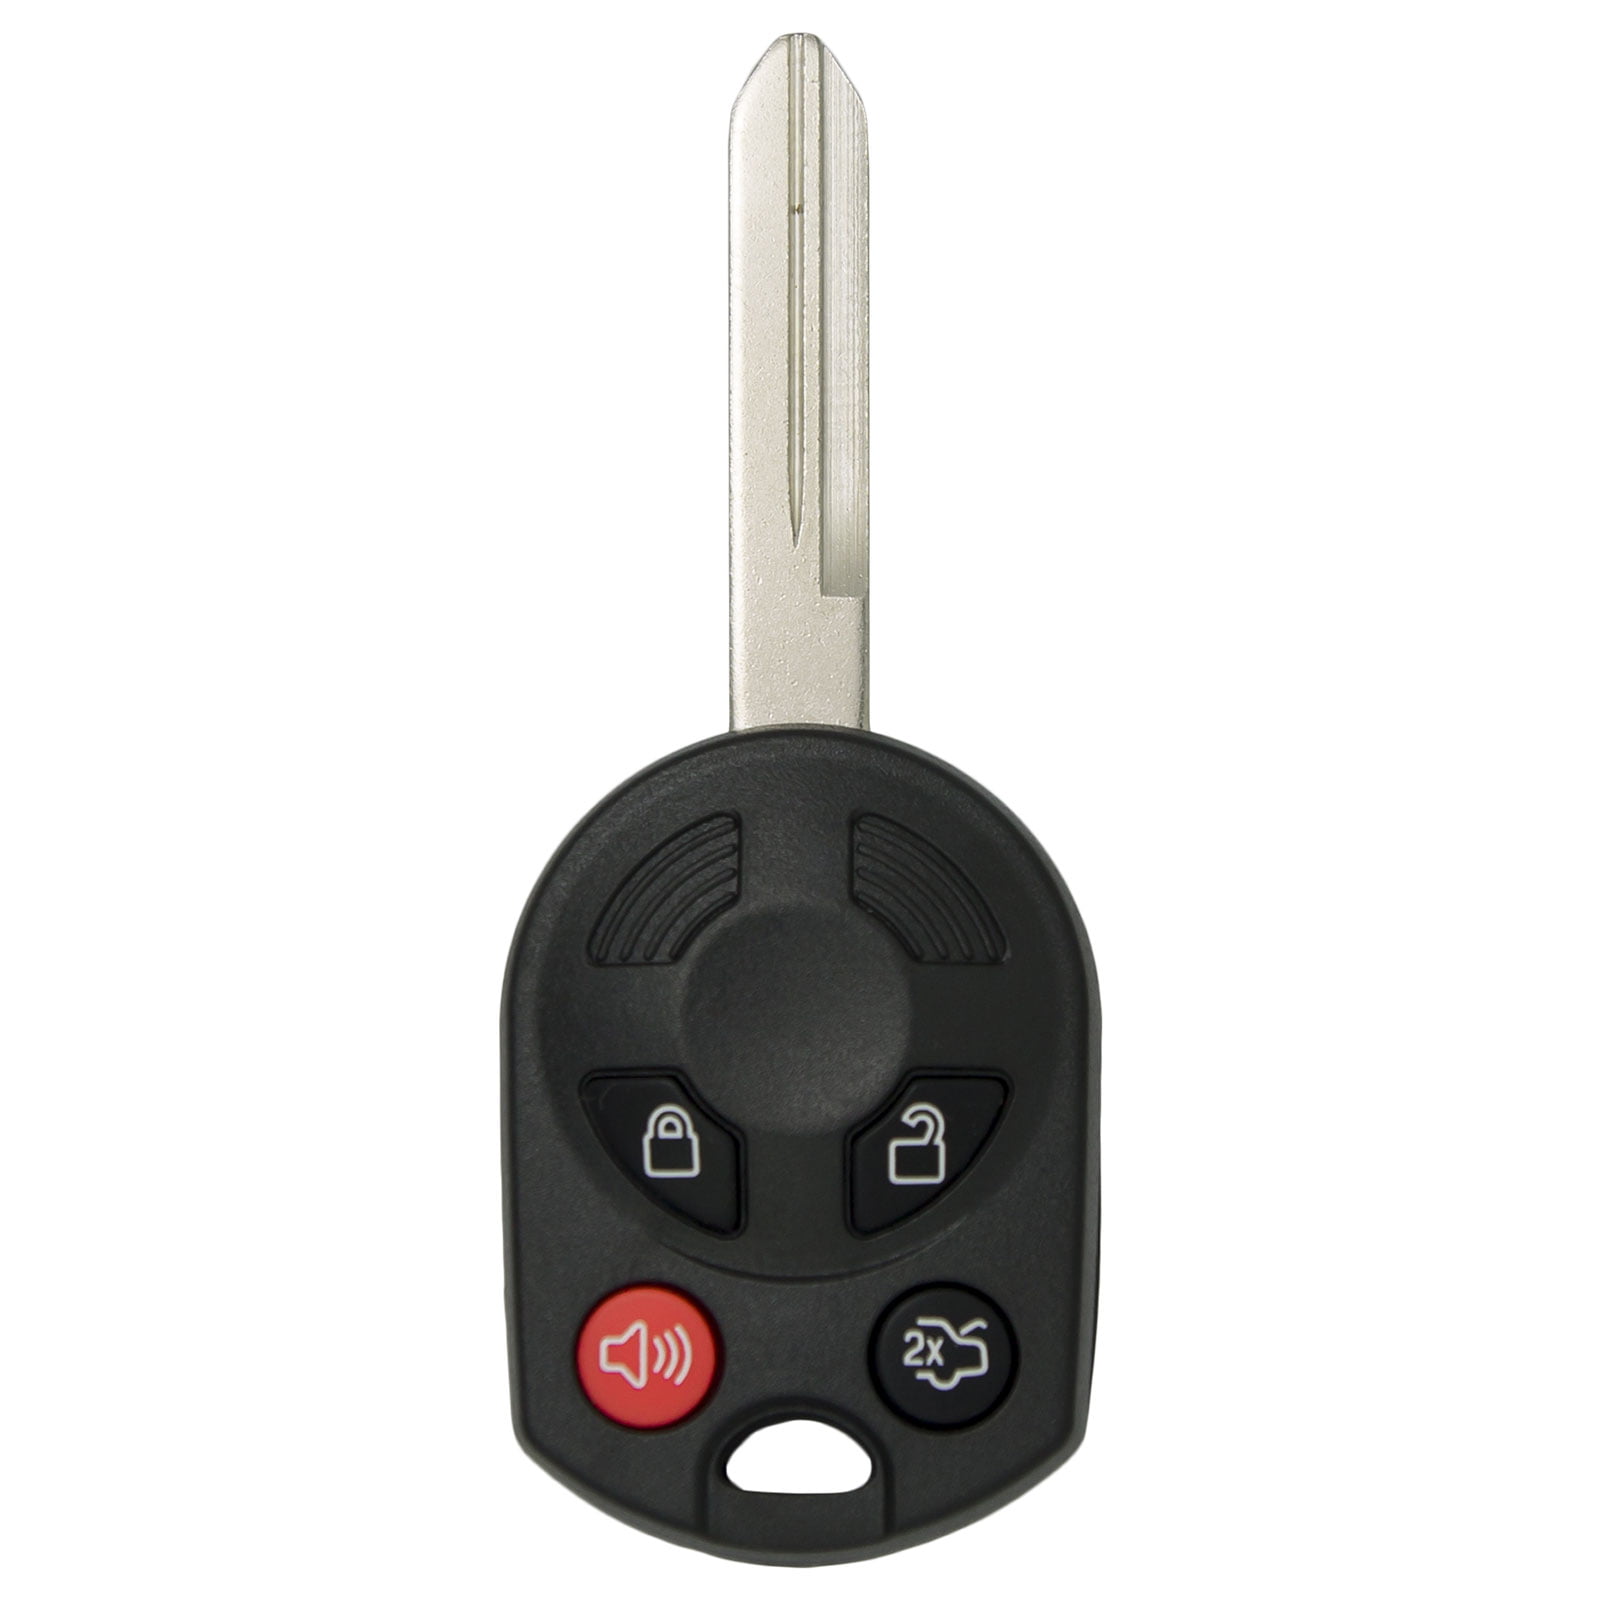 NEW Keyless Entry Key Fob Remote For a 2011 Ford Escape 3 Button DIY Programming